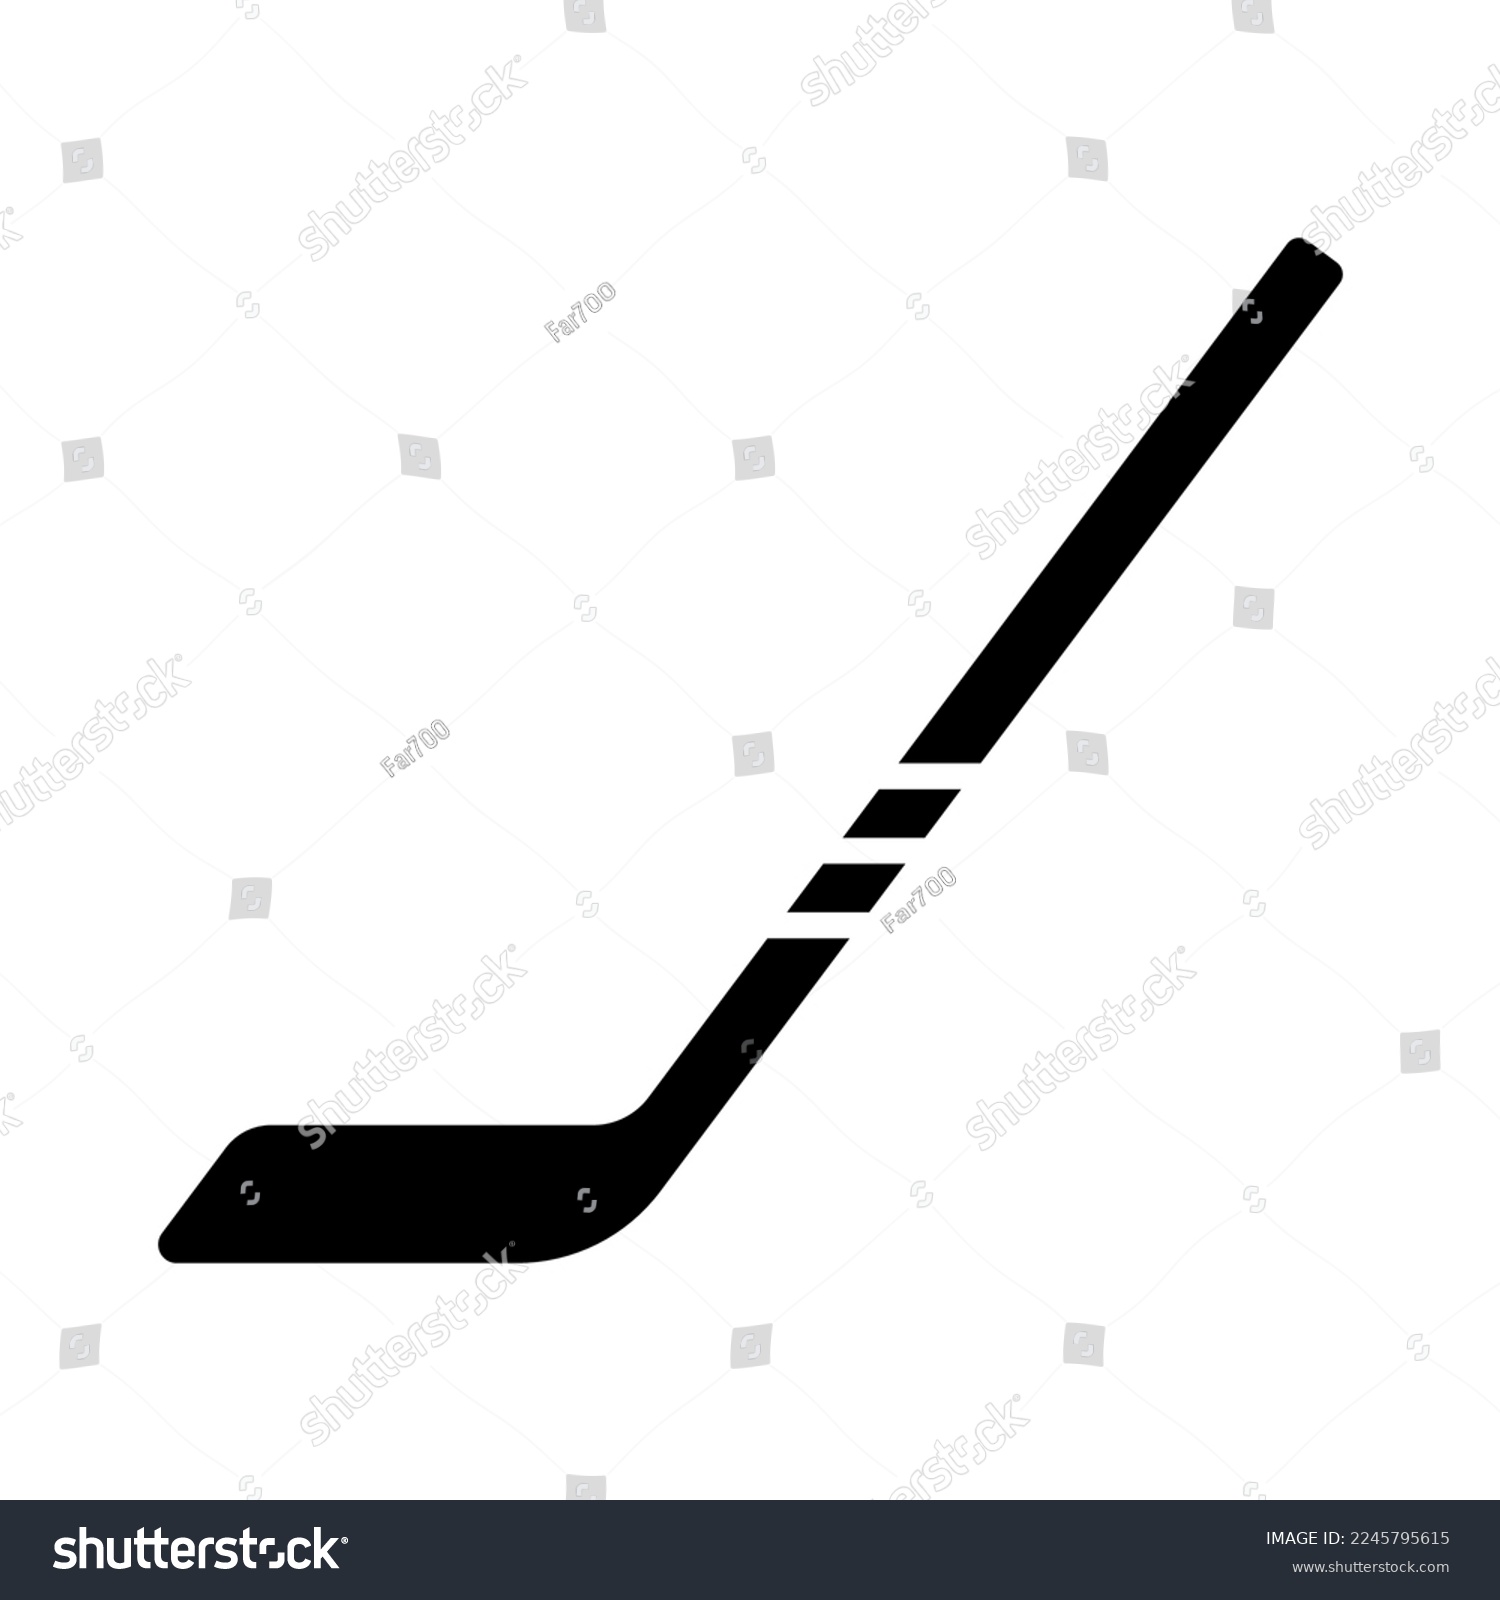 Hockey stick icon. Black silhouette. Side view. Vector simple flat graphic illustration. Isolated object on a white background. Isolate. #2245795615